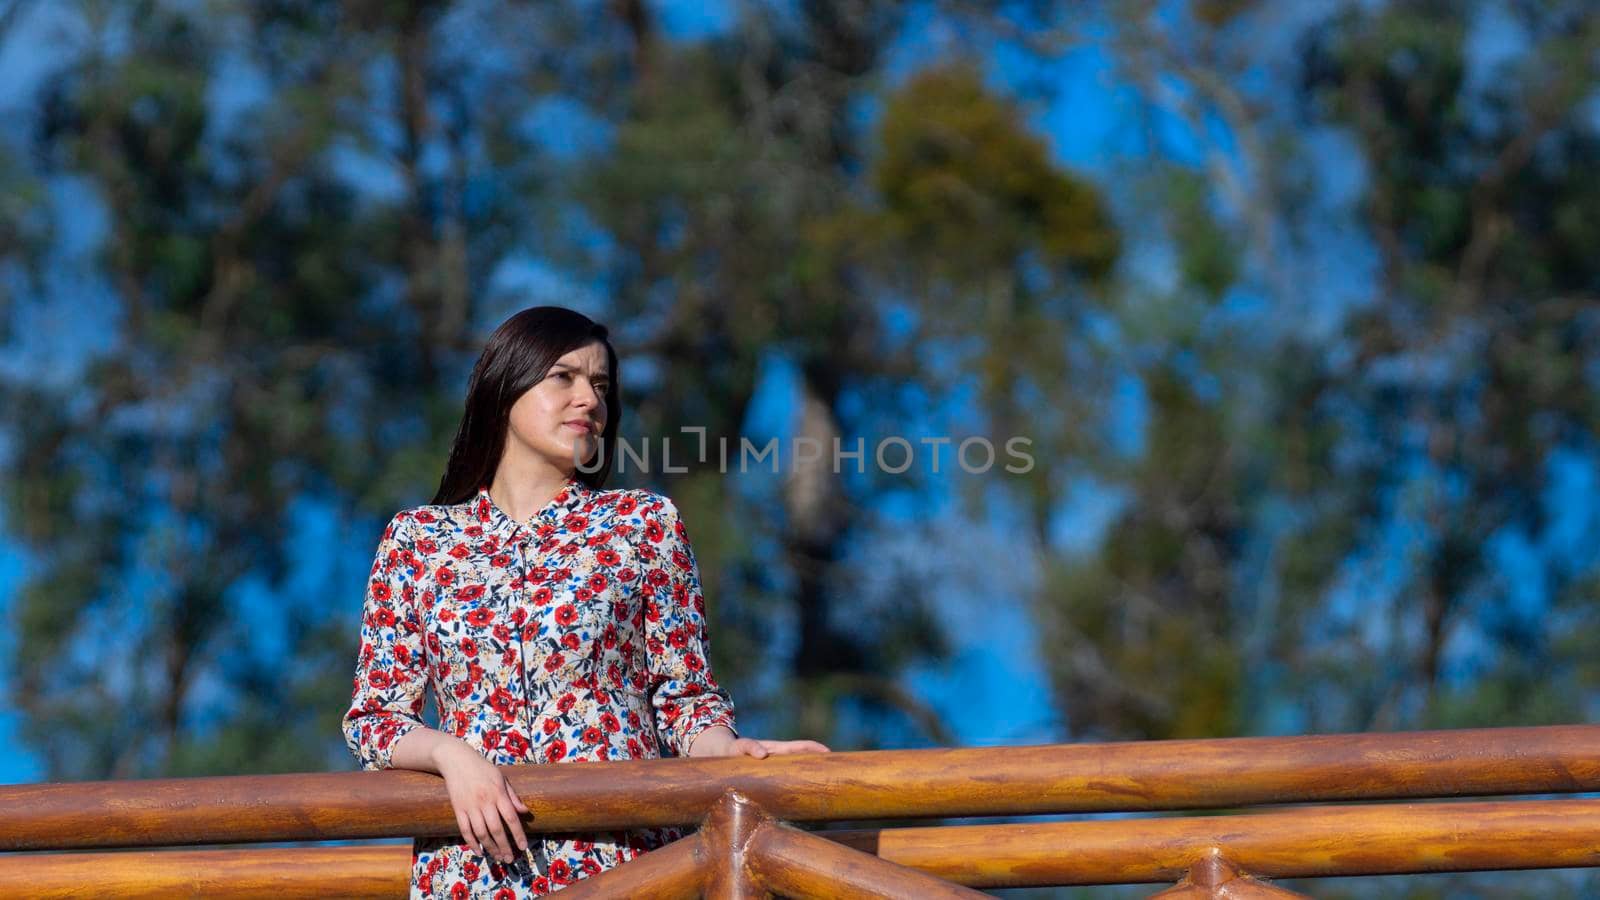 Portrait of beautiful young Latin woman looking to the right with floral design dress standing in the middle of a garden with a background of trees during the morning